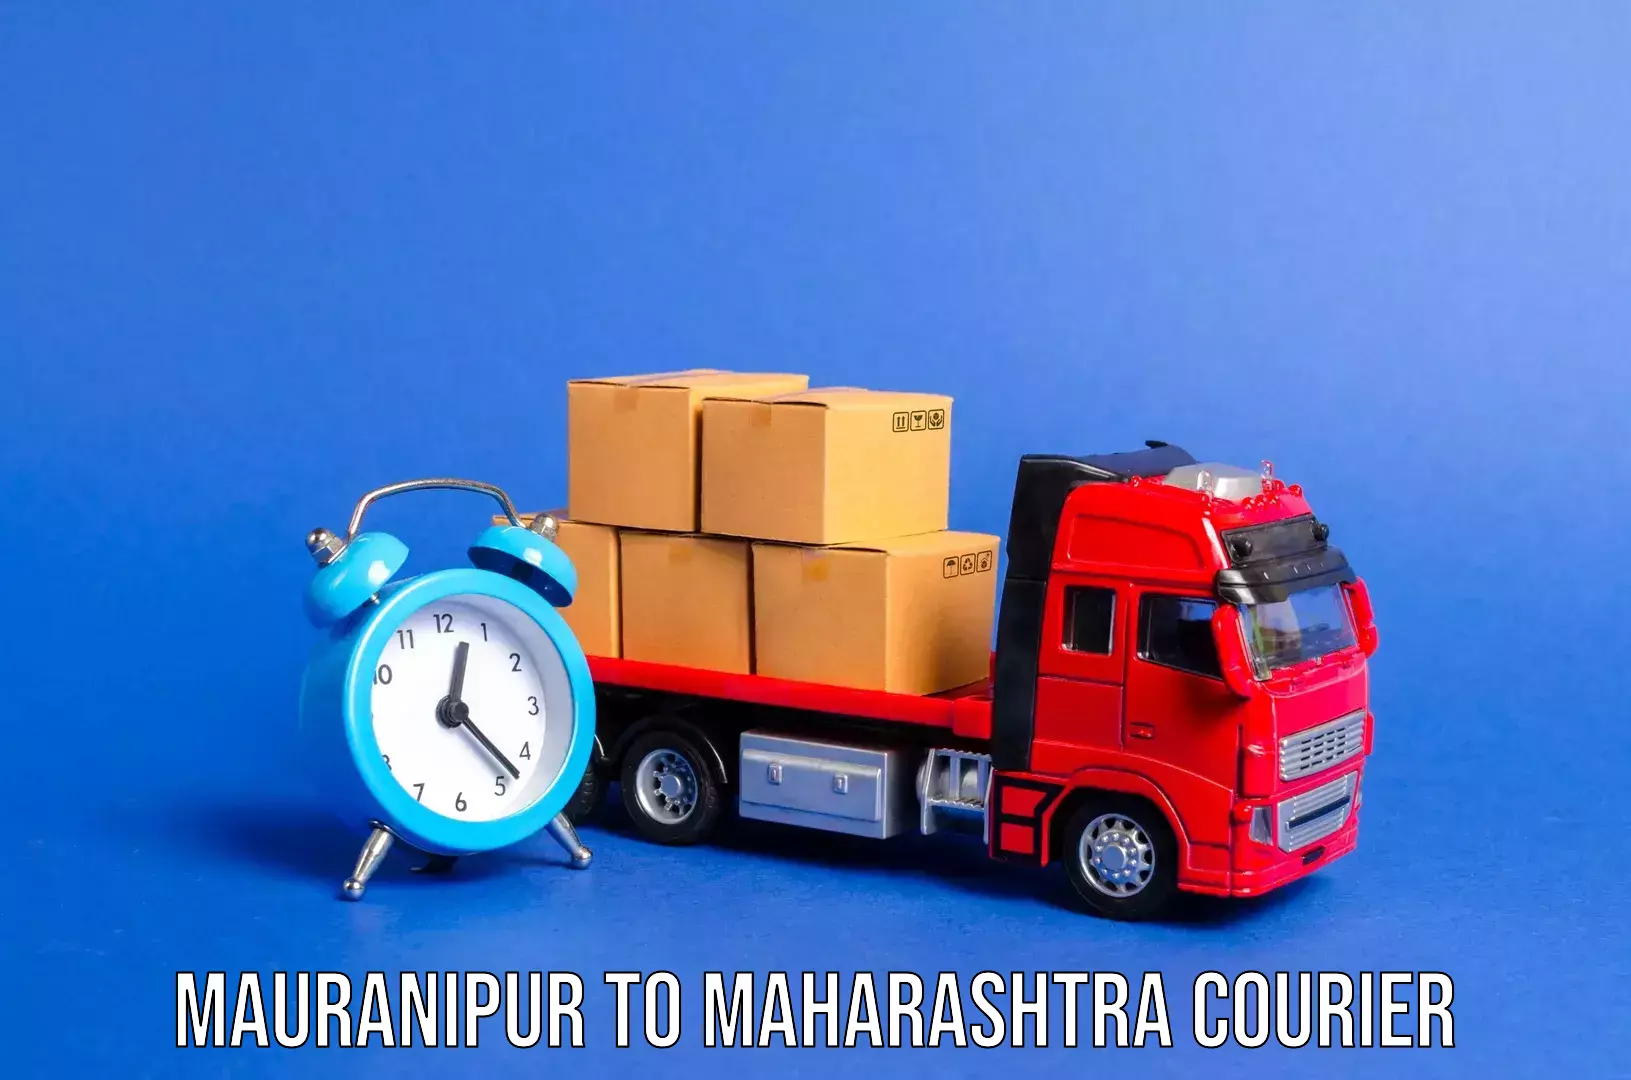 Personal luggage delivery in Mauranipur to IIT Mumbai